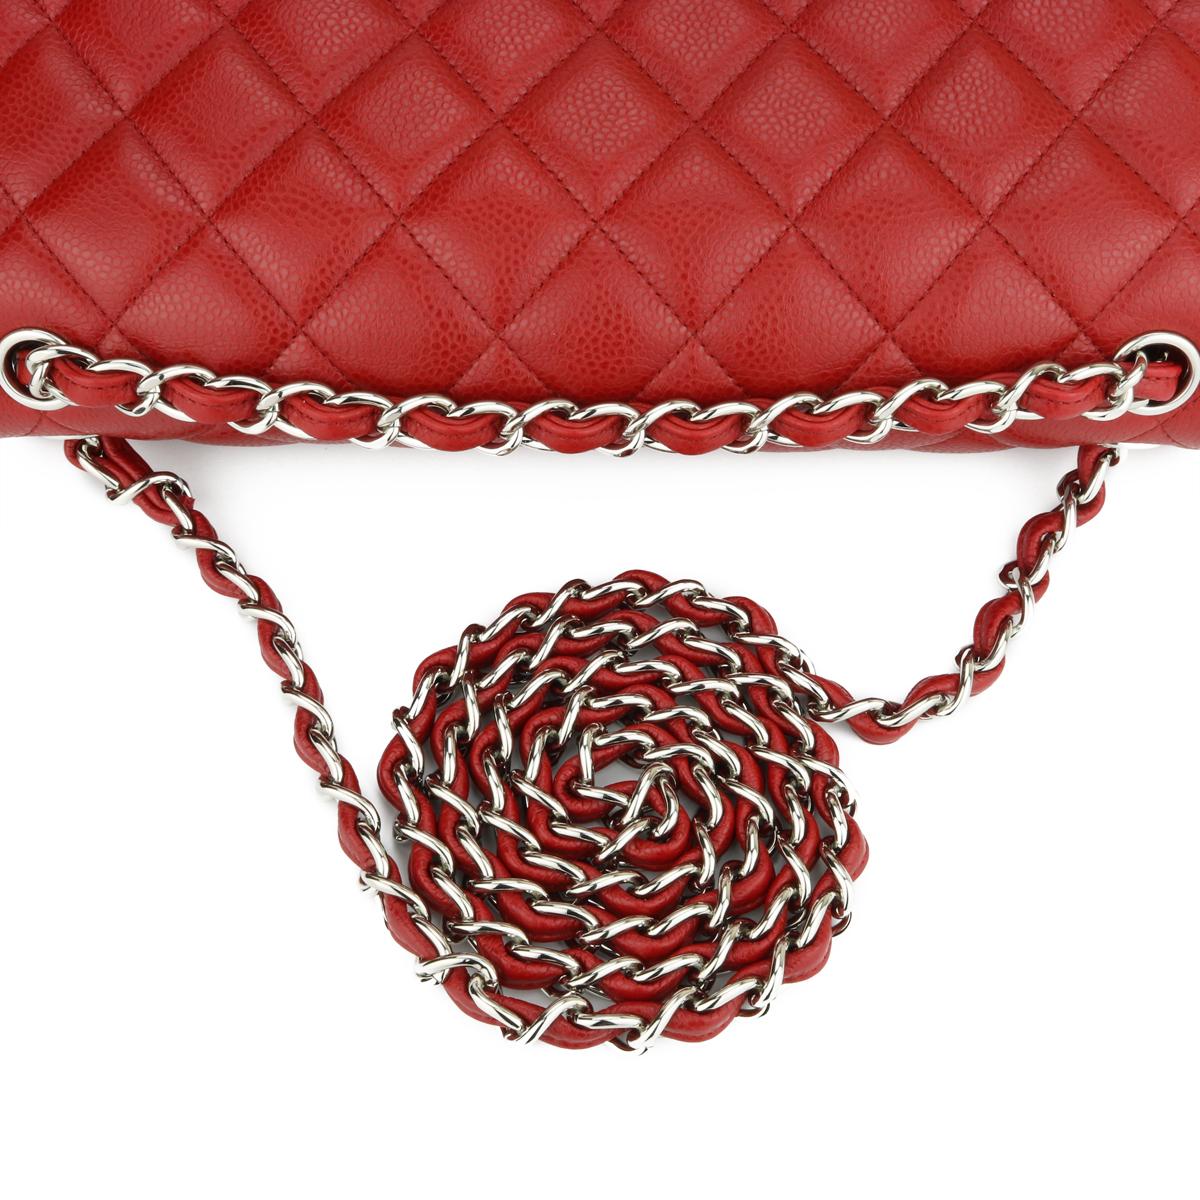 CHANEL Double Flap Jumbo Bag Red Caviar with Silver Hardware 2011 8